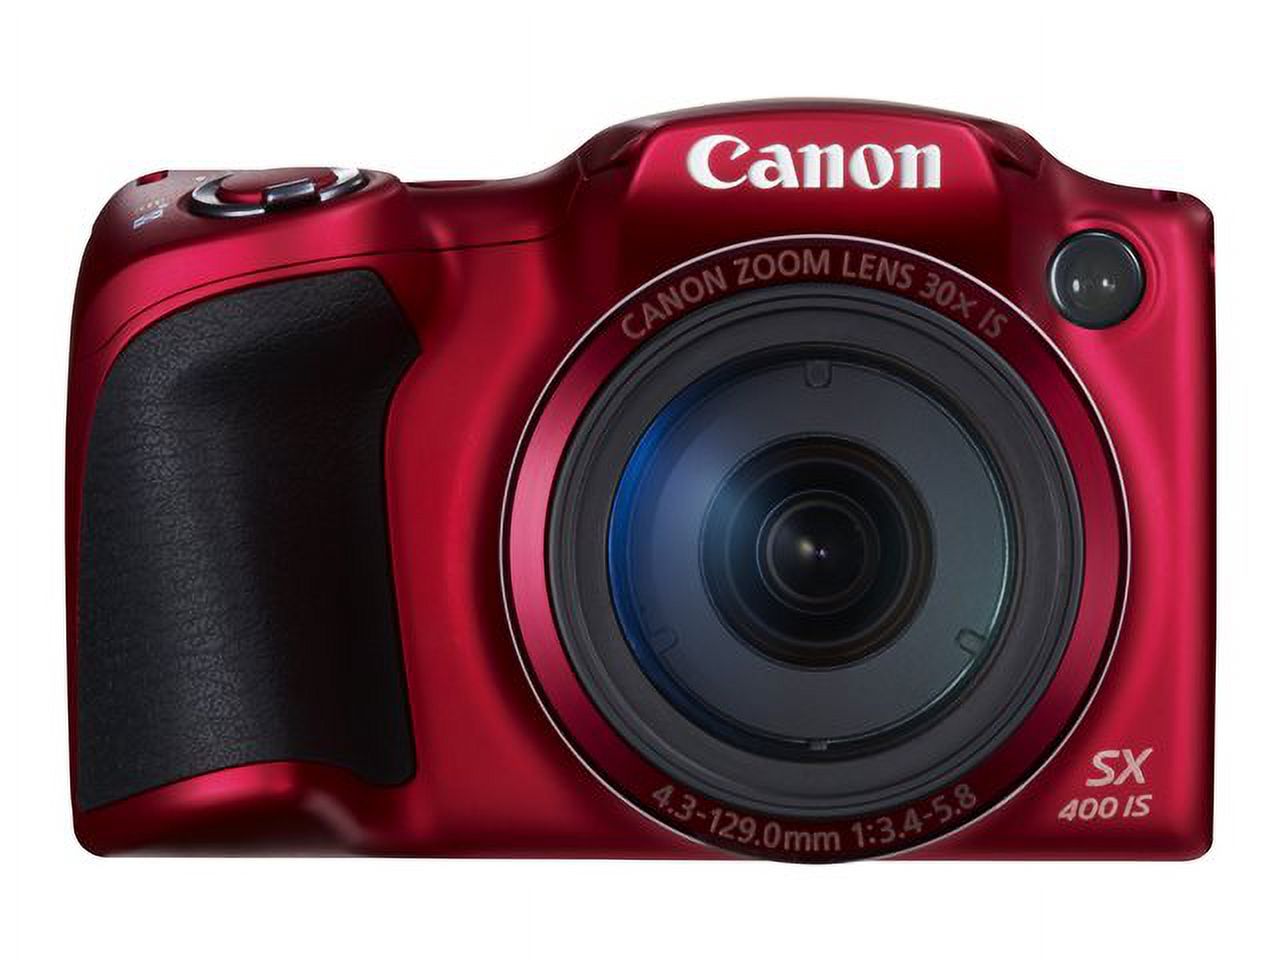 Canon PowerShot SX400 IS - Digital camera - High Definition - compact - 16.0 MP - 30 x optical zoom - red - image 46 of 72